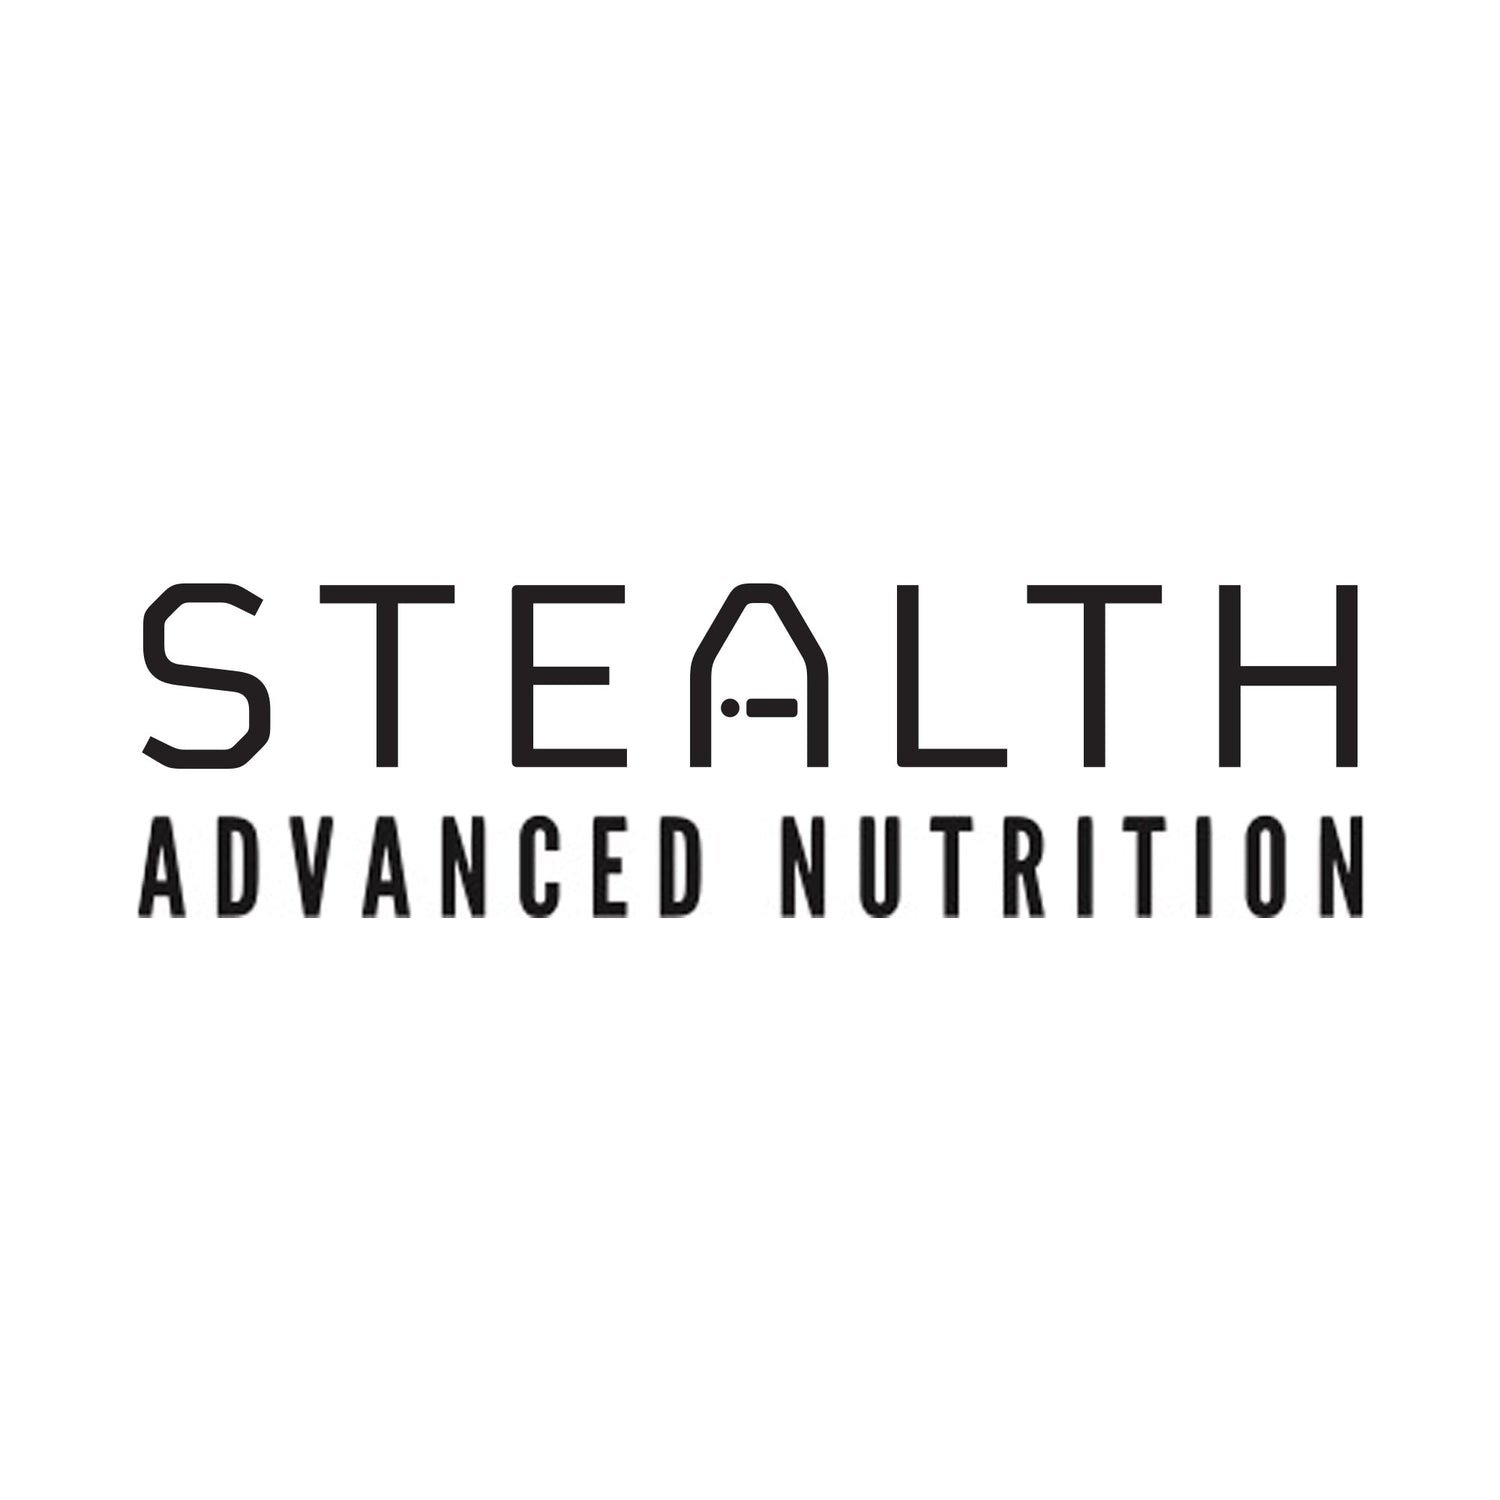 Stealth Advanced Nutrition